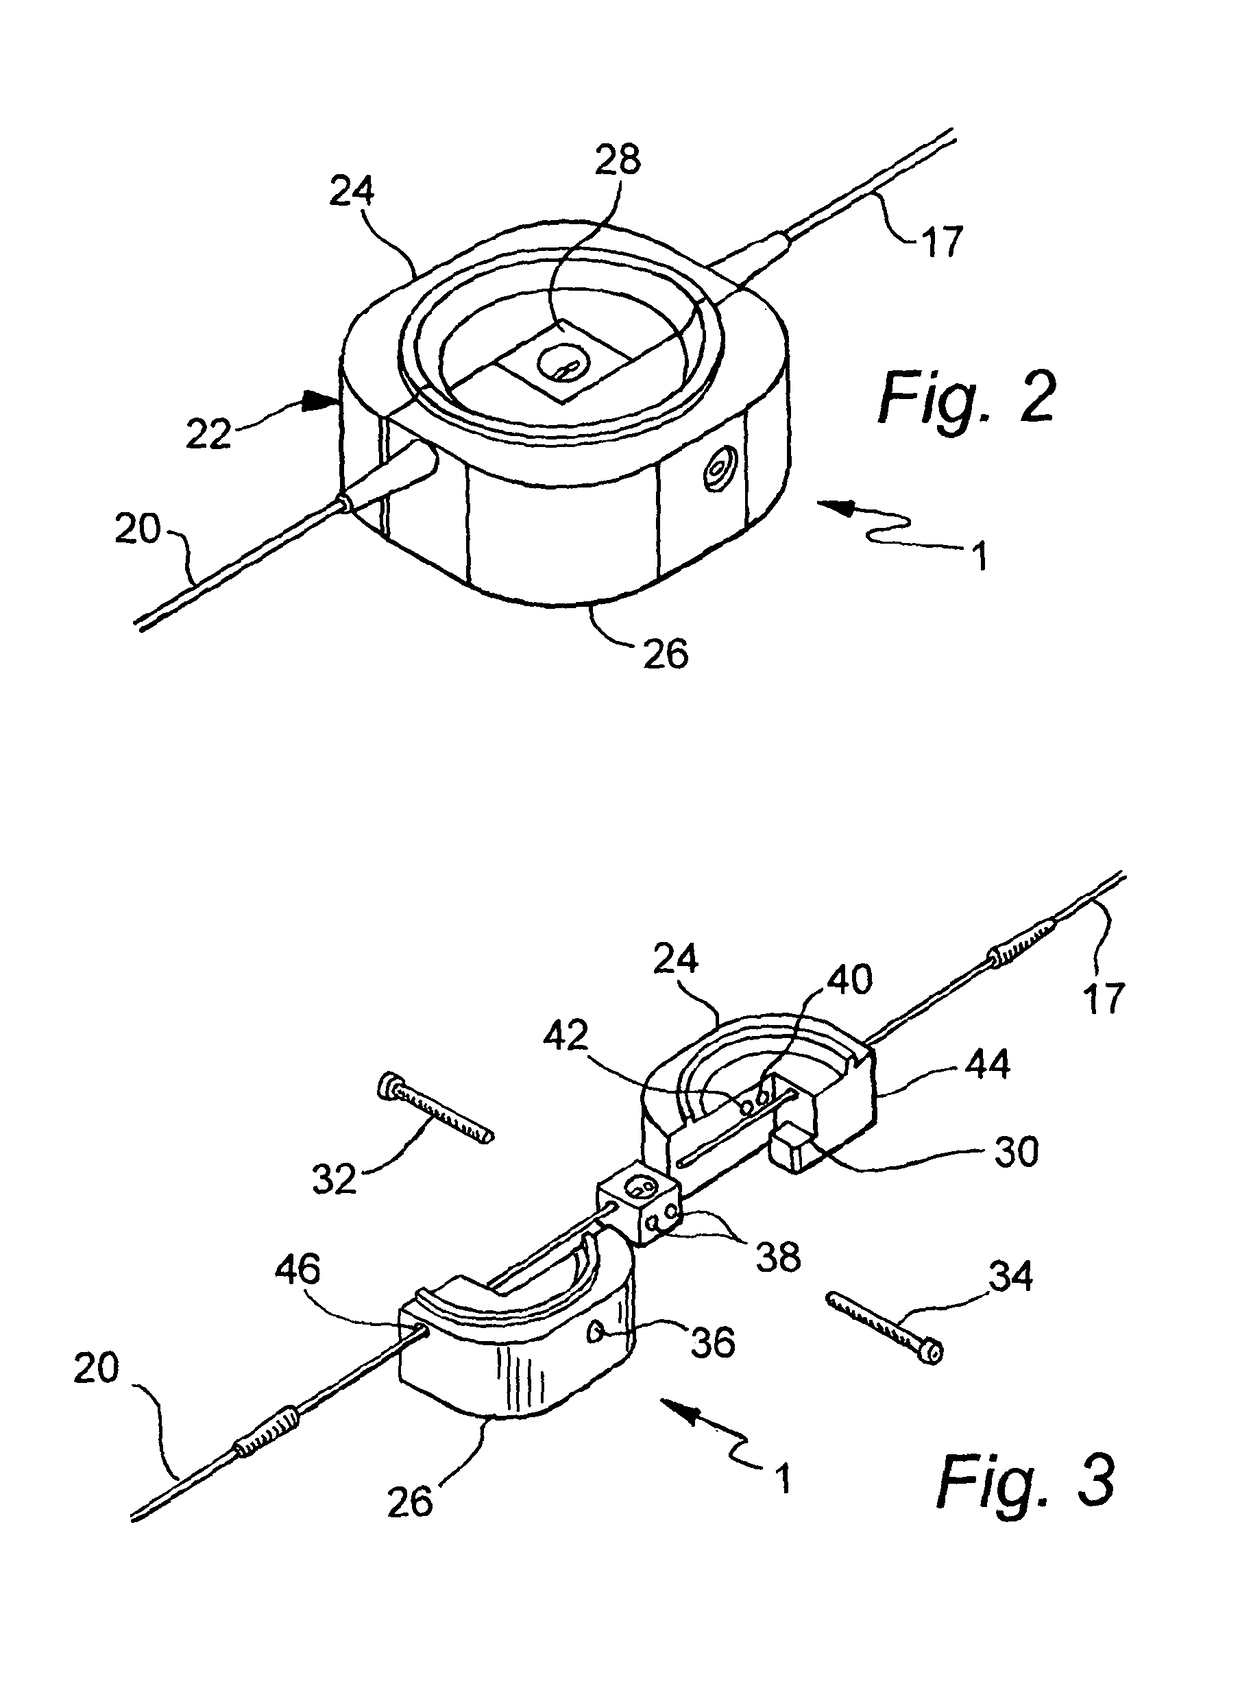 Device for receiving small volume liquid samples